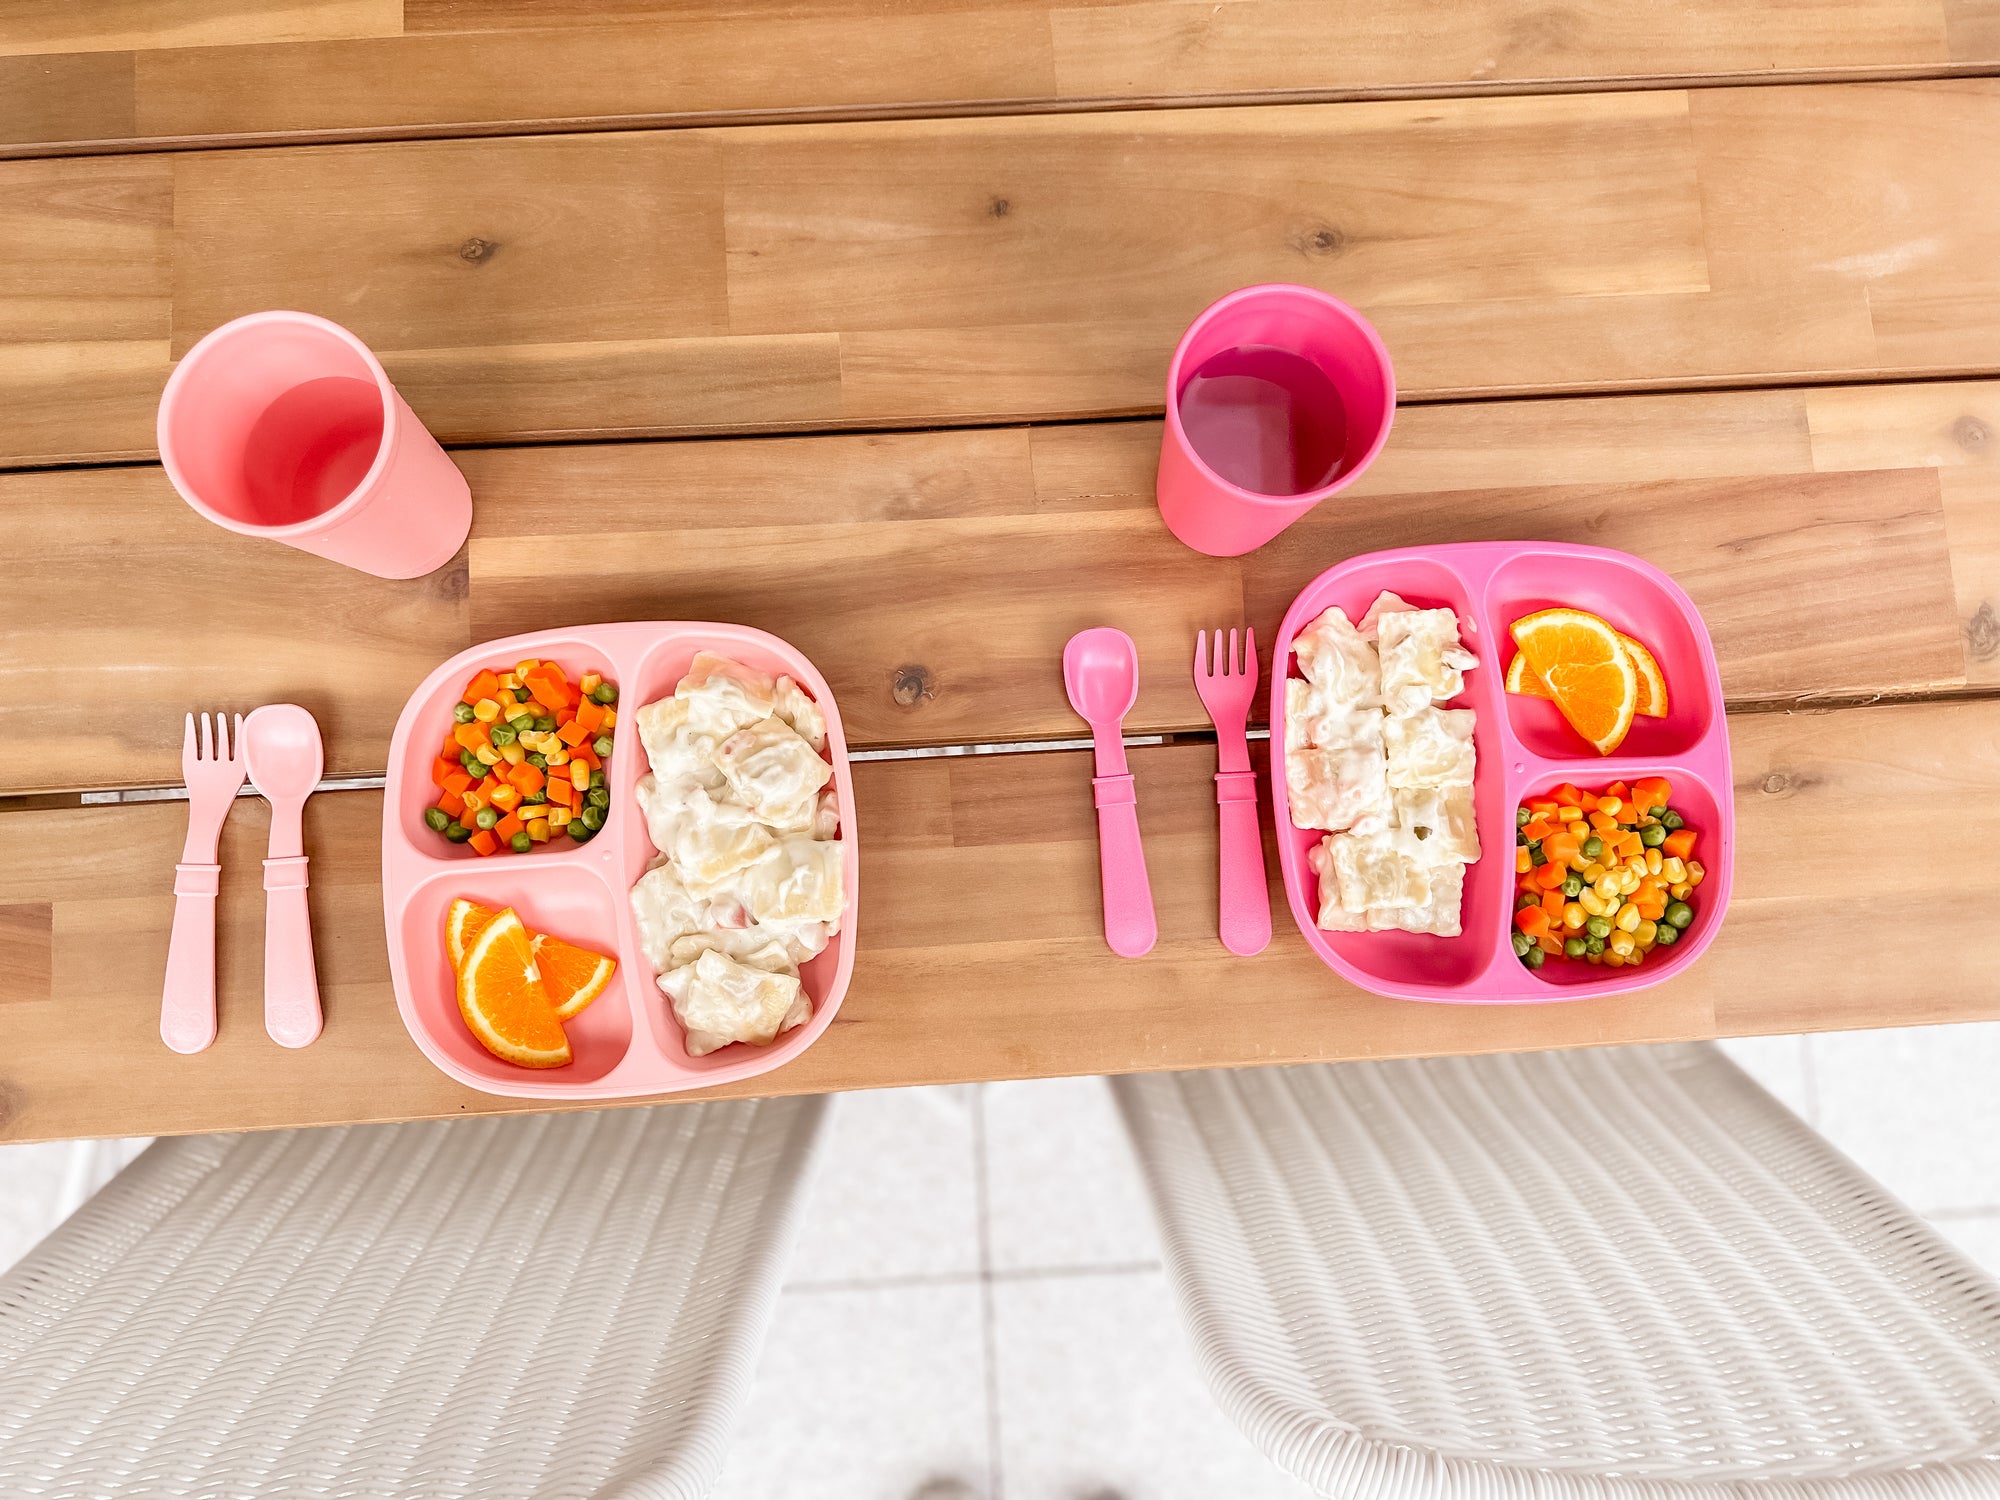 Re-play 3 Meals Princess Set (Purple, Bright Pink, Baby Pink)